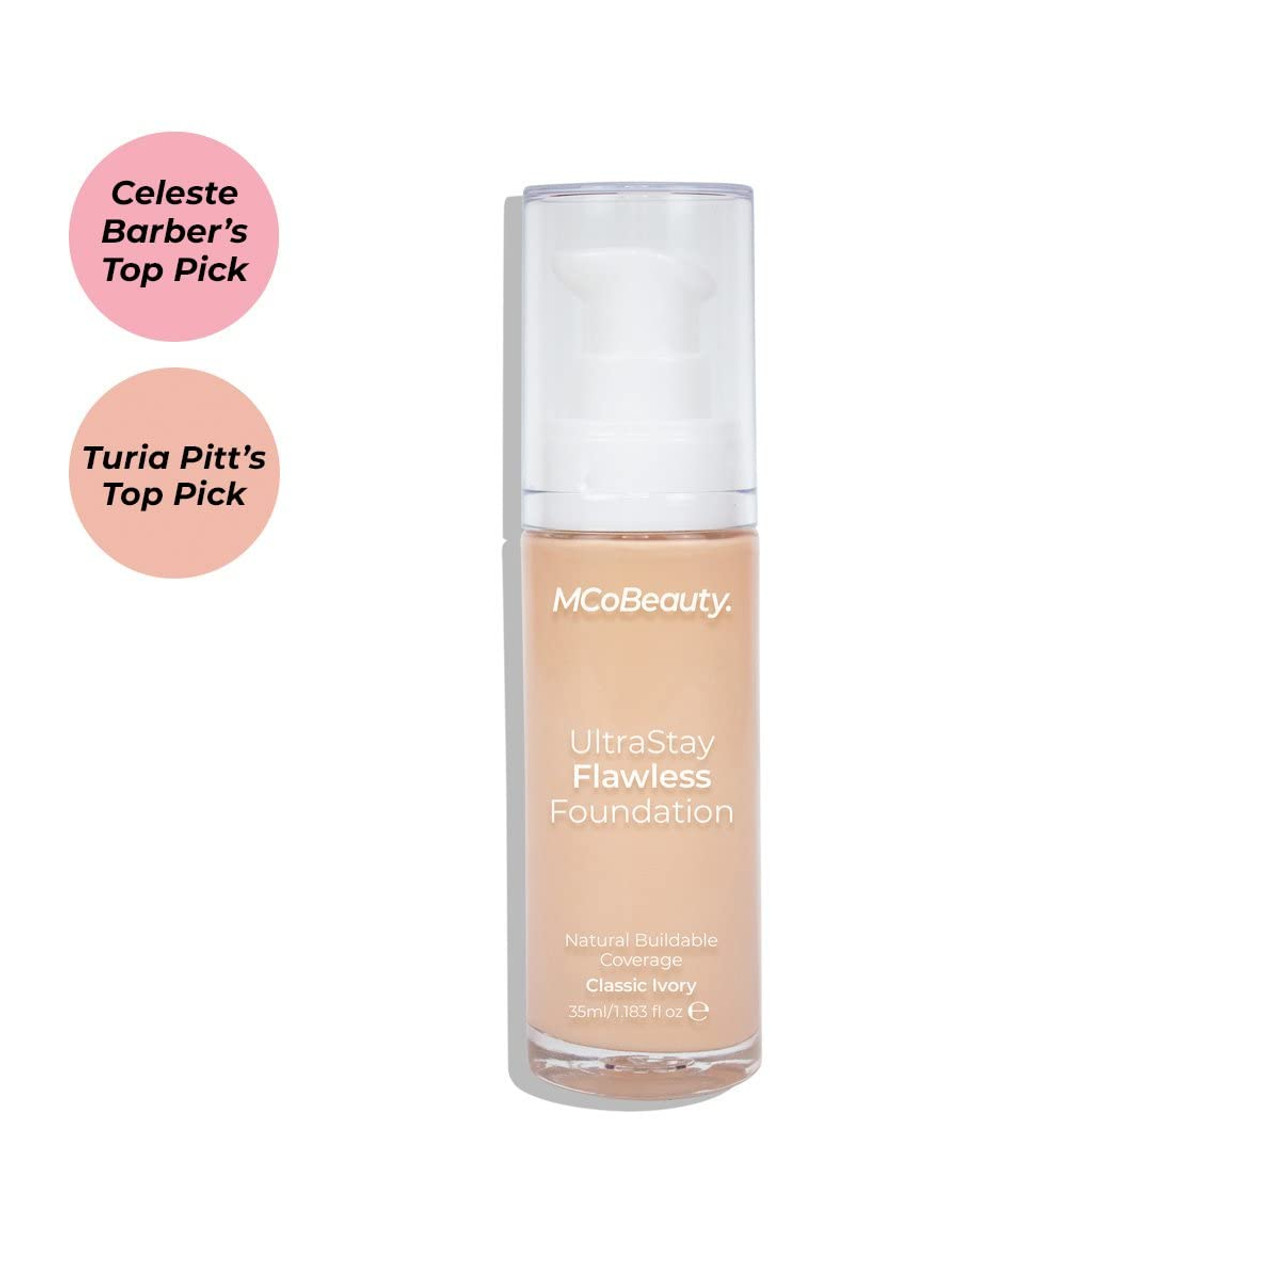 Teint Idole Ultra Wear All Over Concealer - SweetCare United States